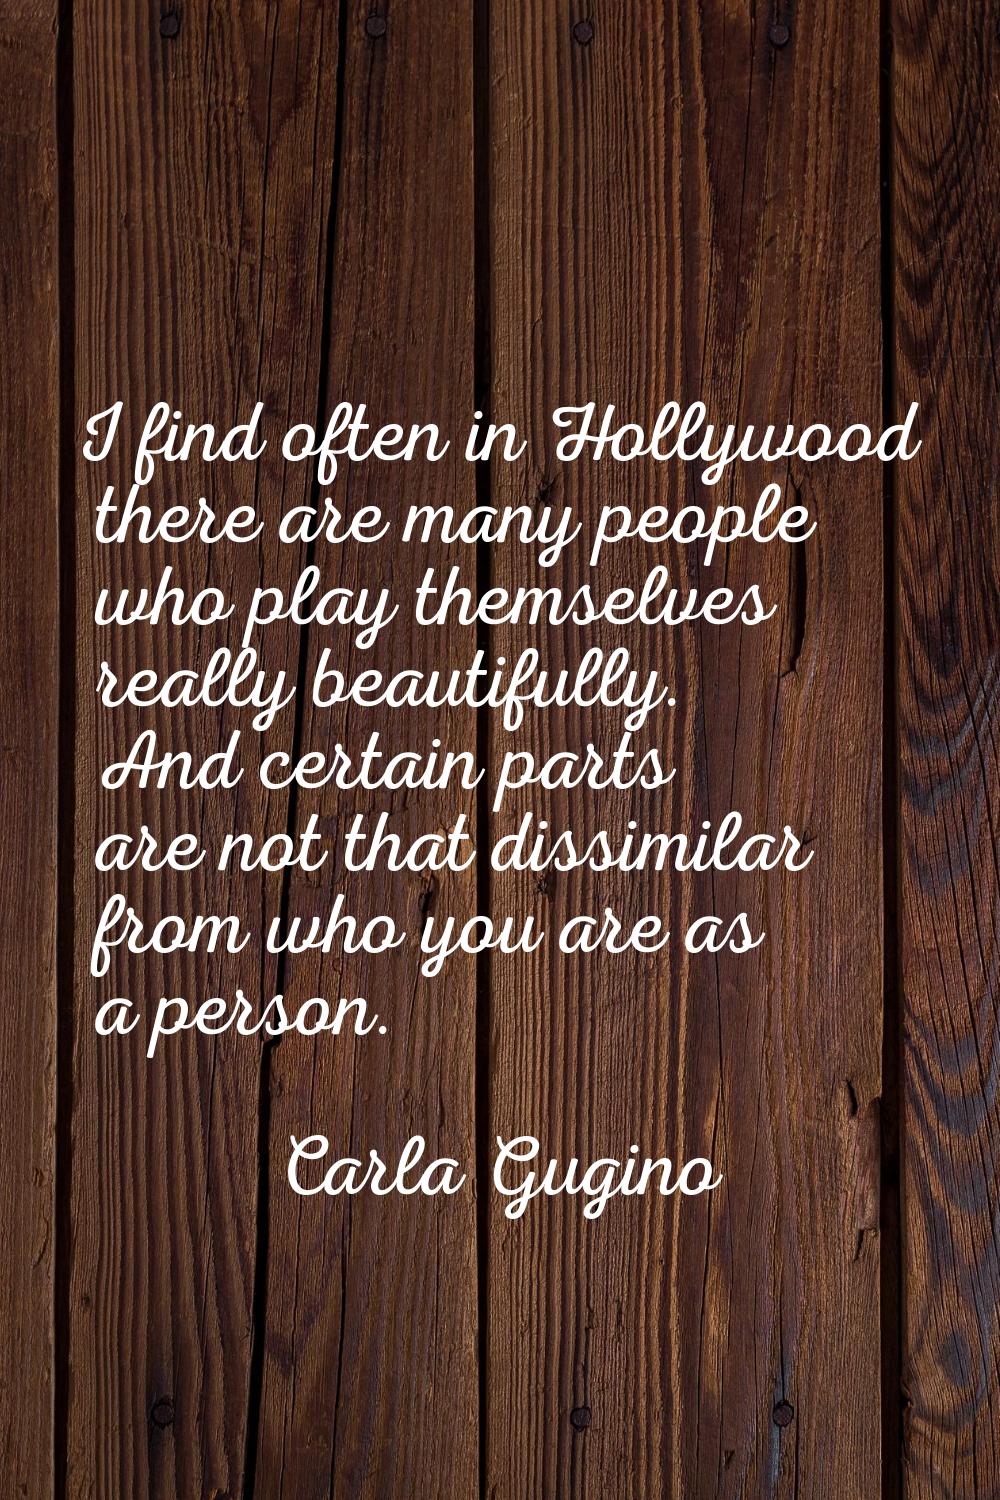 I find often in Hollywood there are many people who play themselves really beautifully. And certain